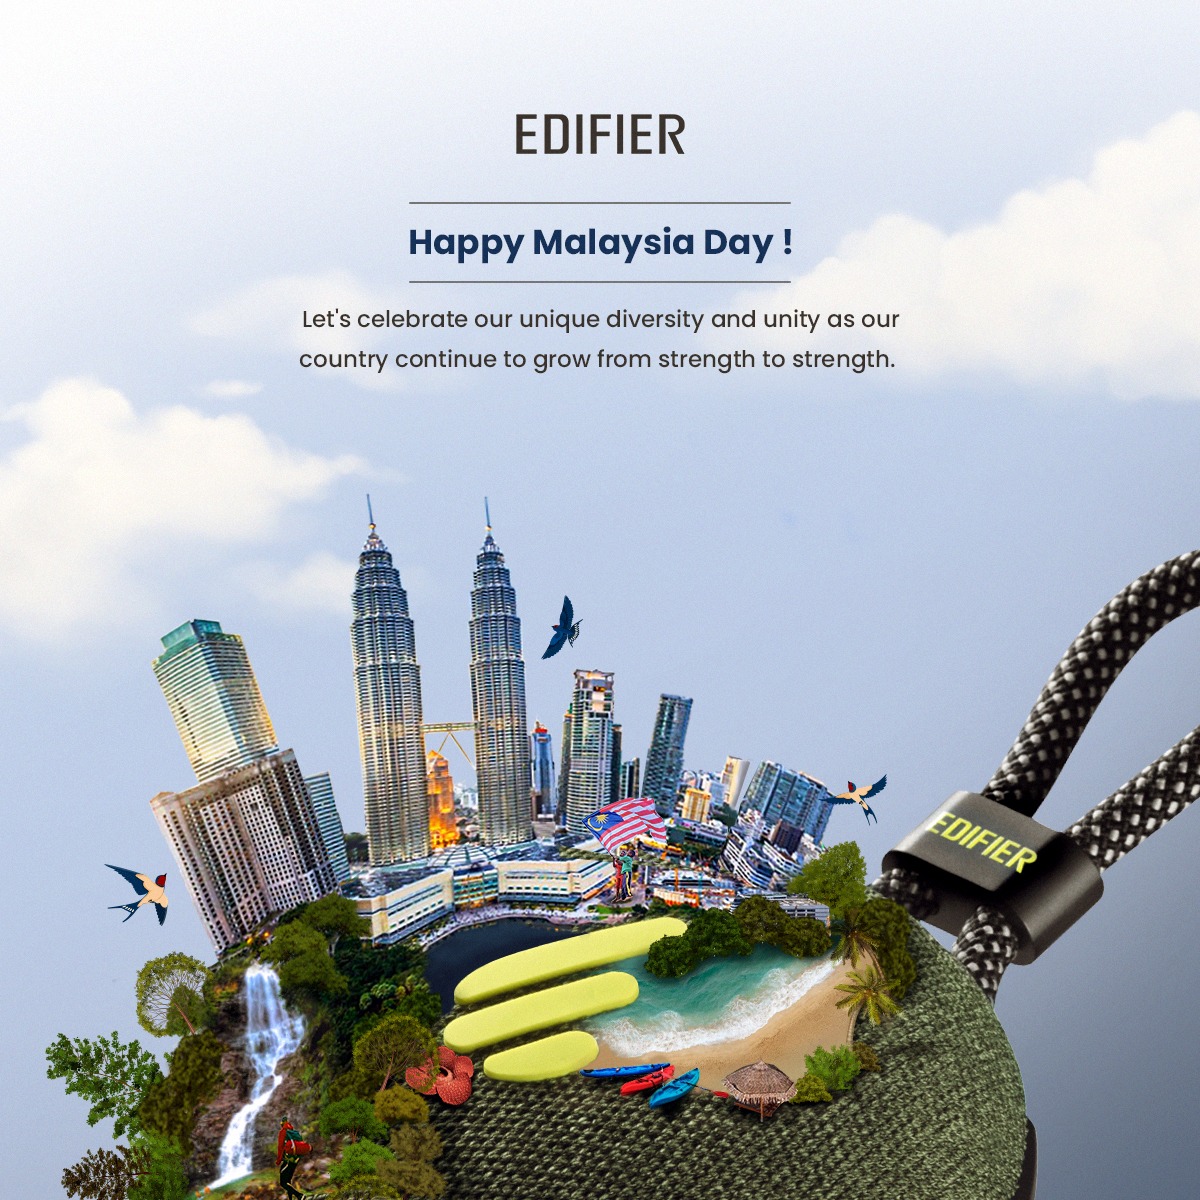 SELAMAT HARI MALAYSIA ! 
Let us all pledge to protect the peace, unity and embrace diversity of our great nation ❤️🇲🇾.

#edifier #edifiermalaysia #edifan #audio #speker #MalaysiaDay #16september #HariMalaysia #speaker #MP100plus